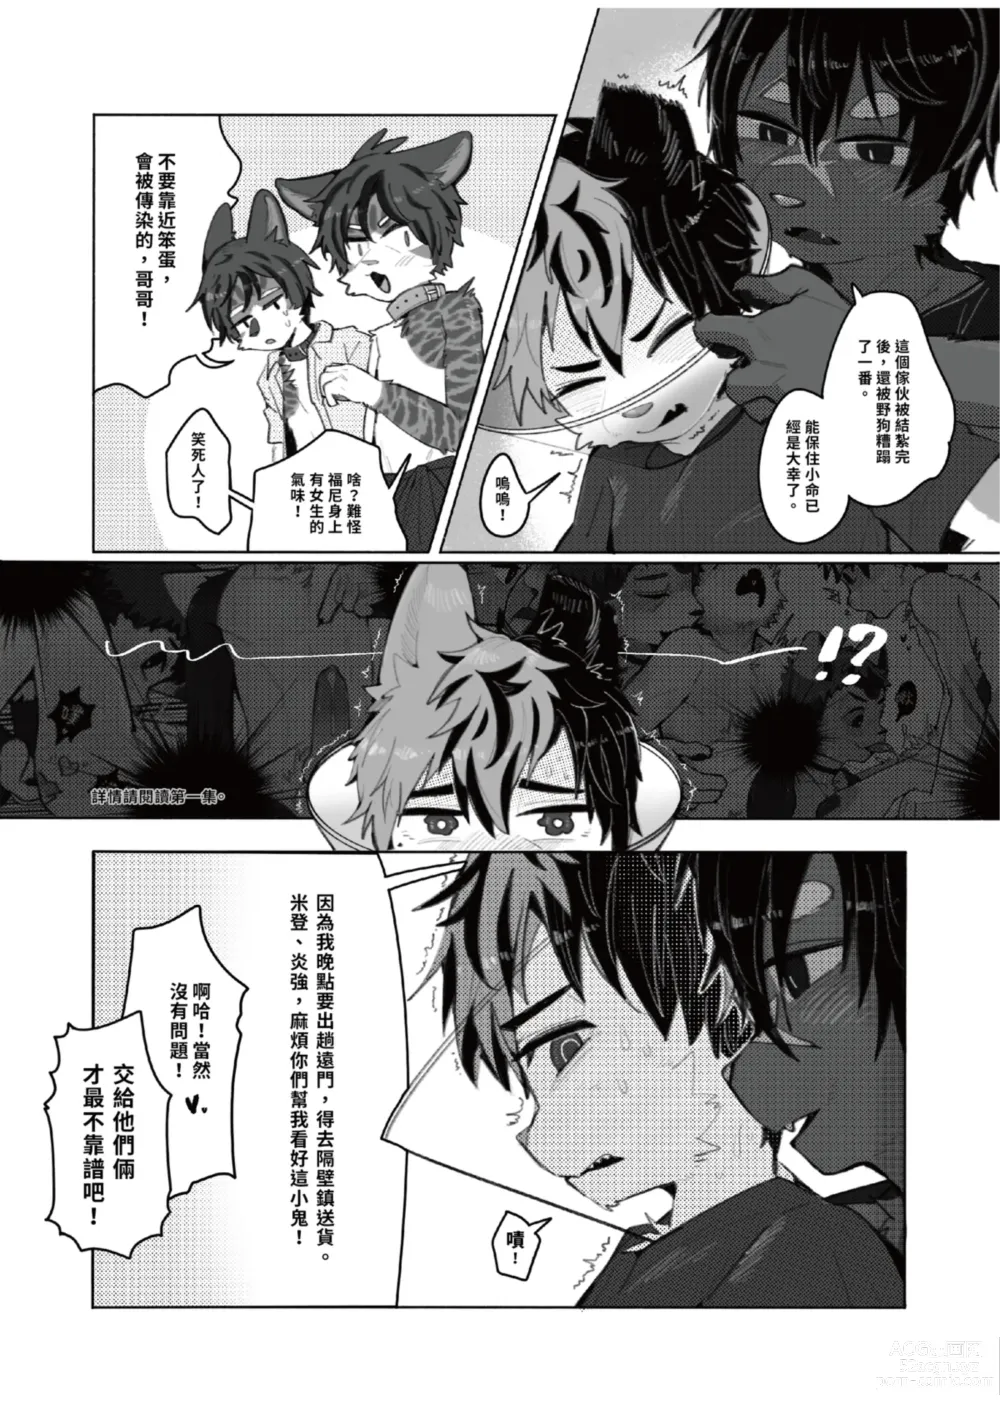 Page 7 of doujinshi 巷弄發浪 Heat Alley